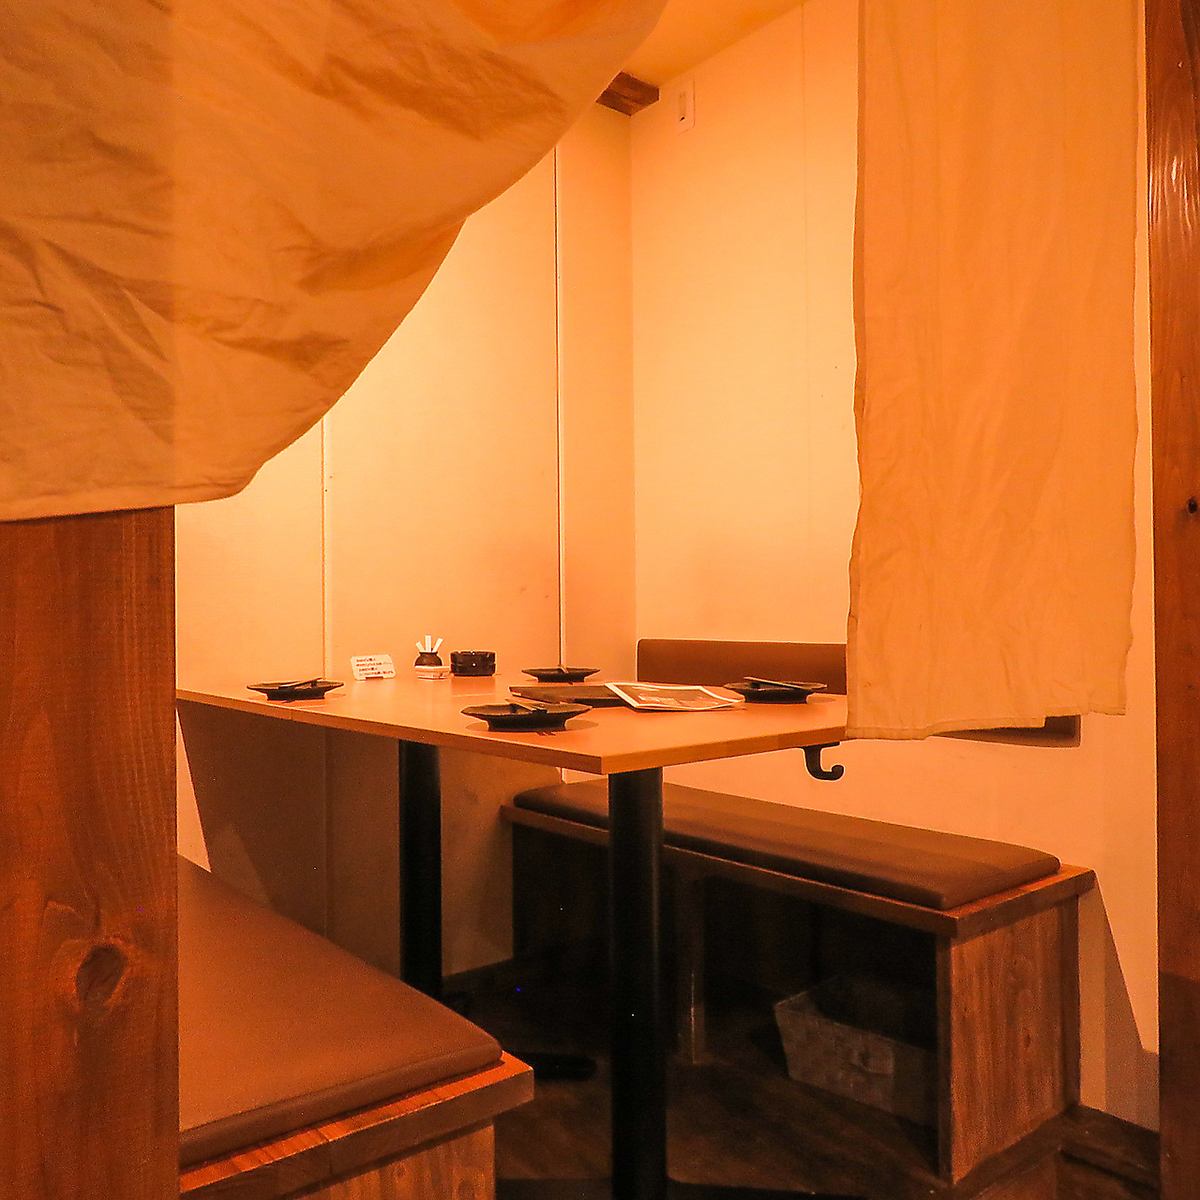 We have a private room with a sunken kotatsu.Available for up to 8 people!